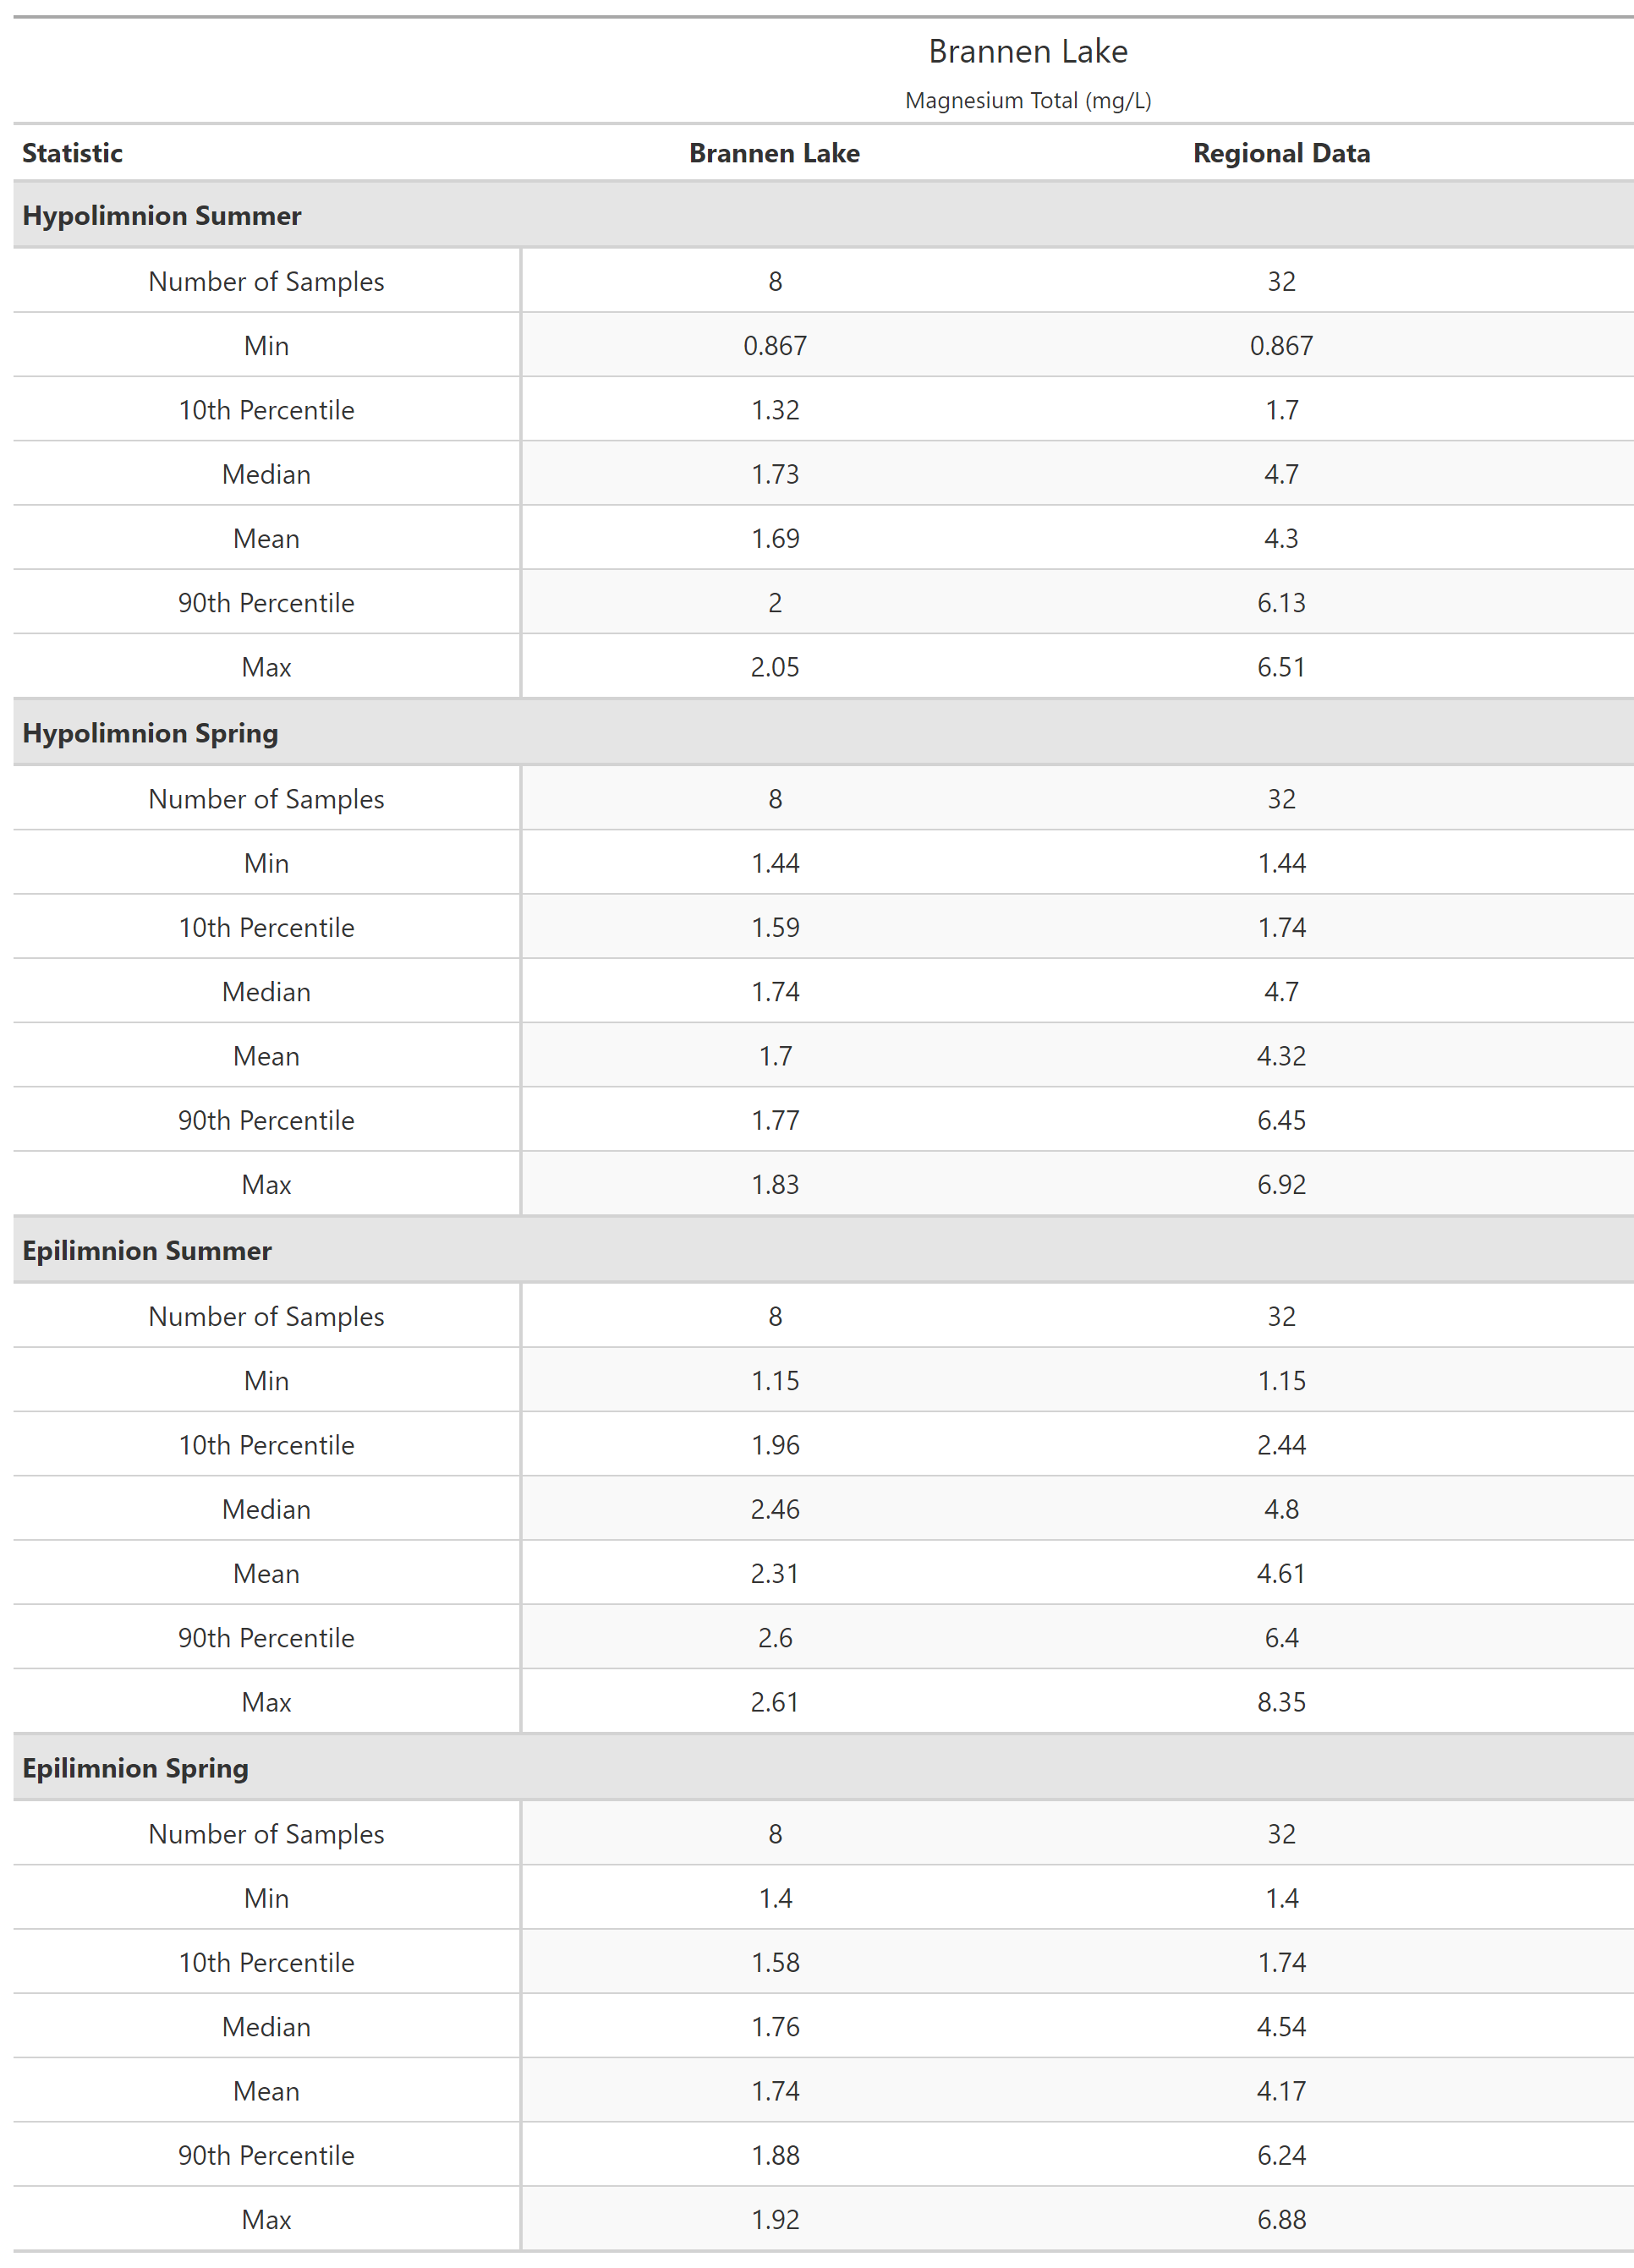 A table of summary statistics for Magnesium Total with comparison to regional data